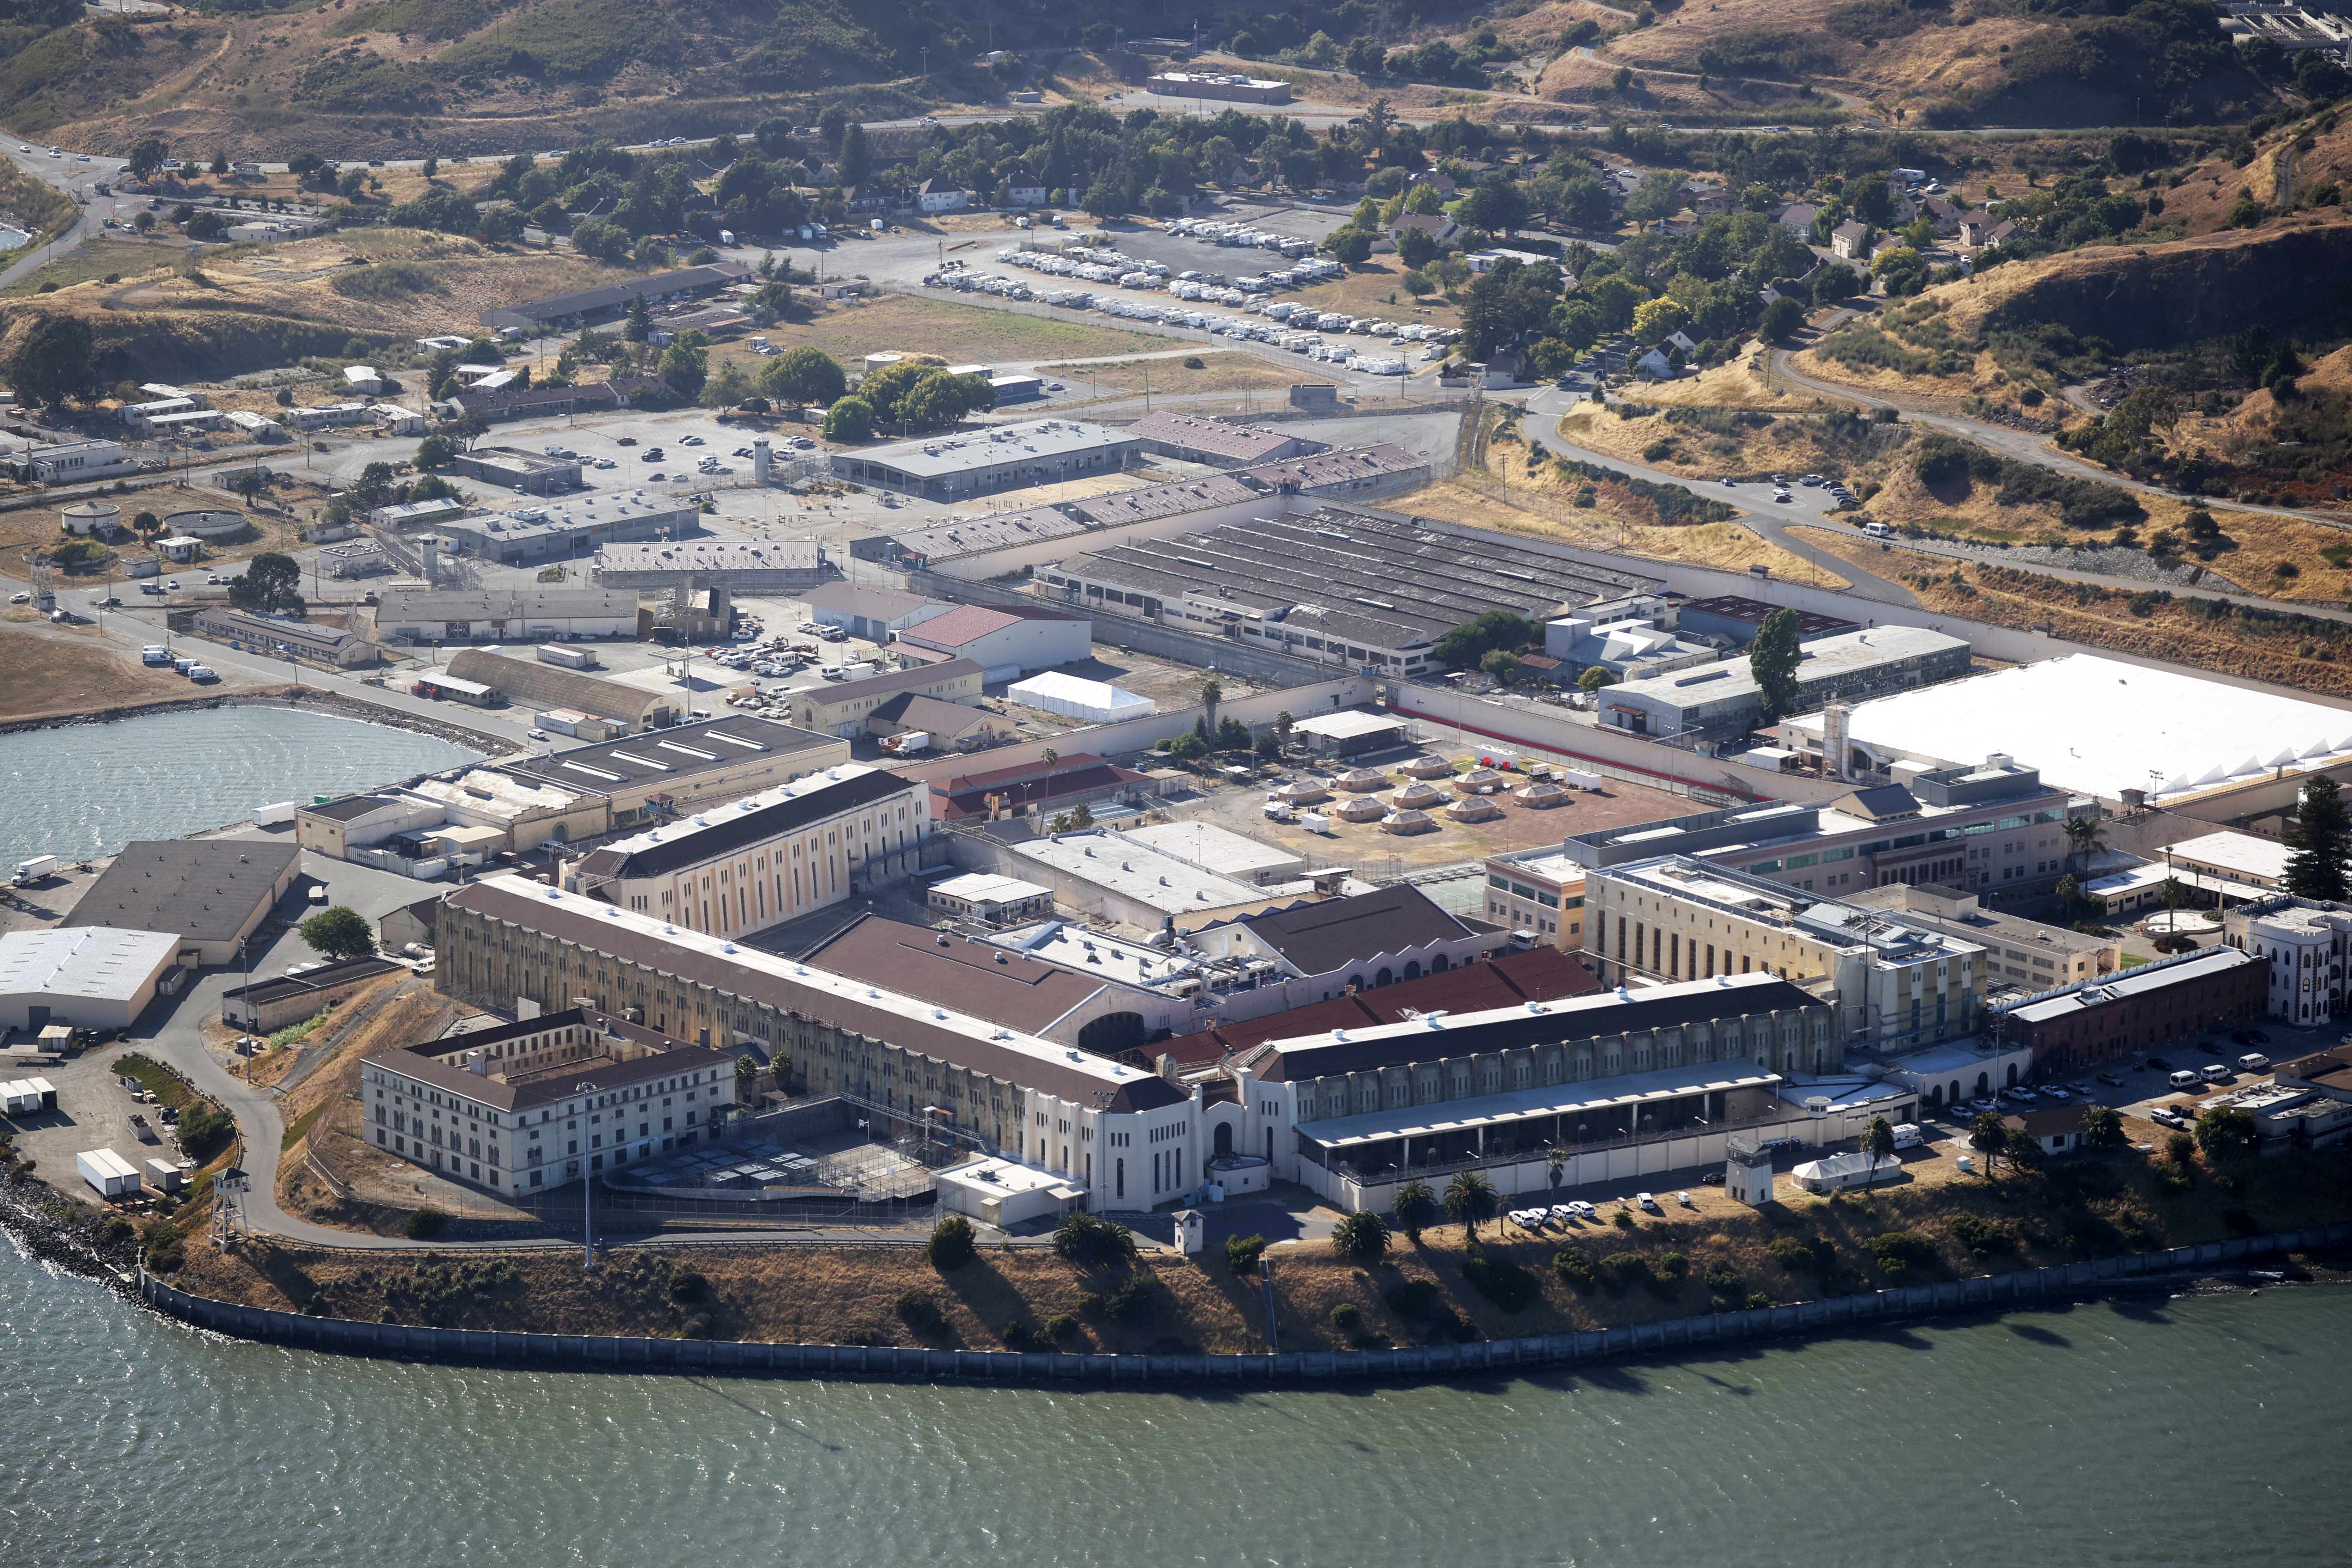 Over 1,400 inmates and staff at San Quentin State Prison in California have been infected with coronavirus. (Photo: Justin Sullivan/Getty Images)